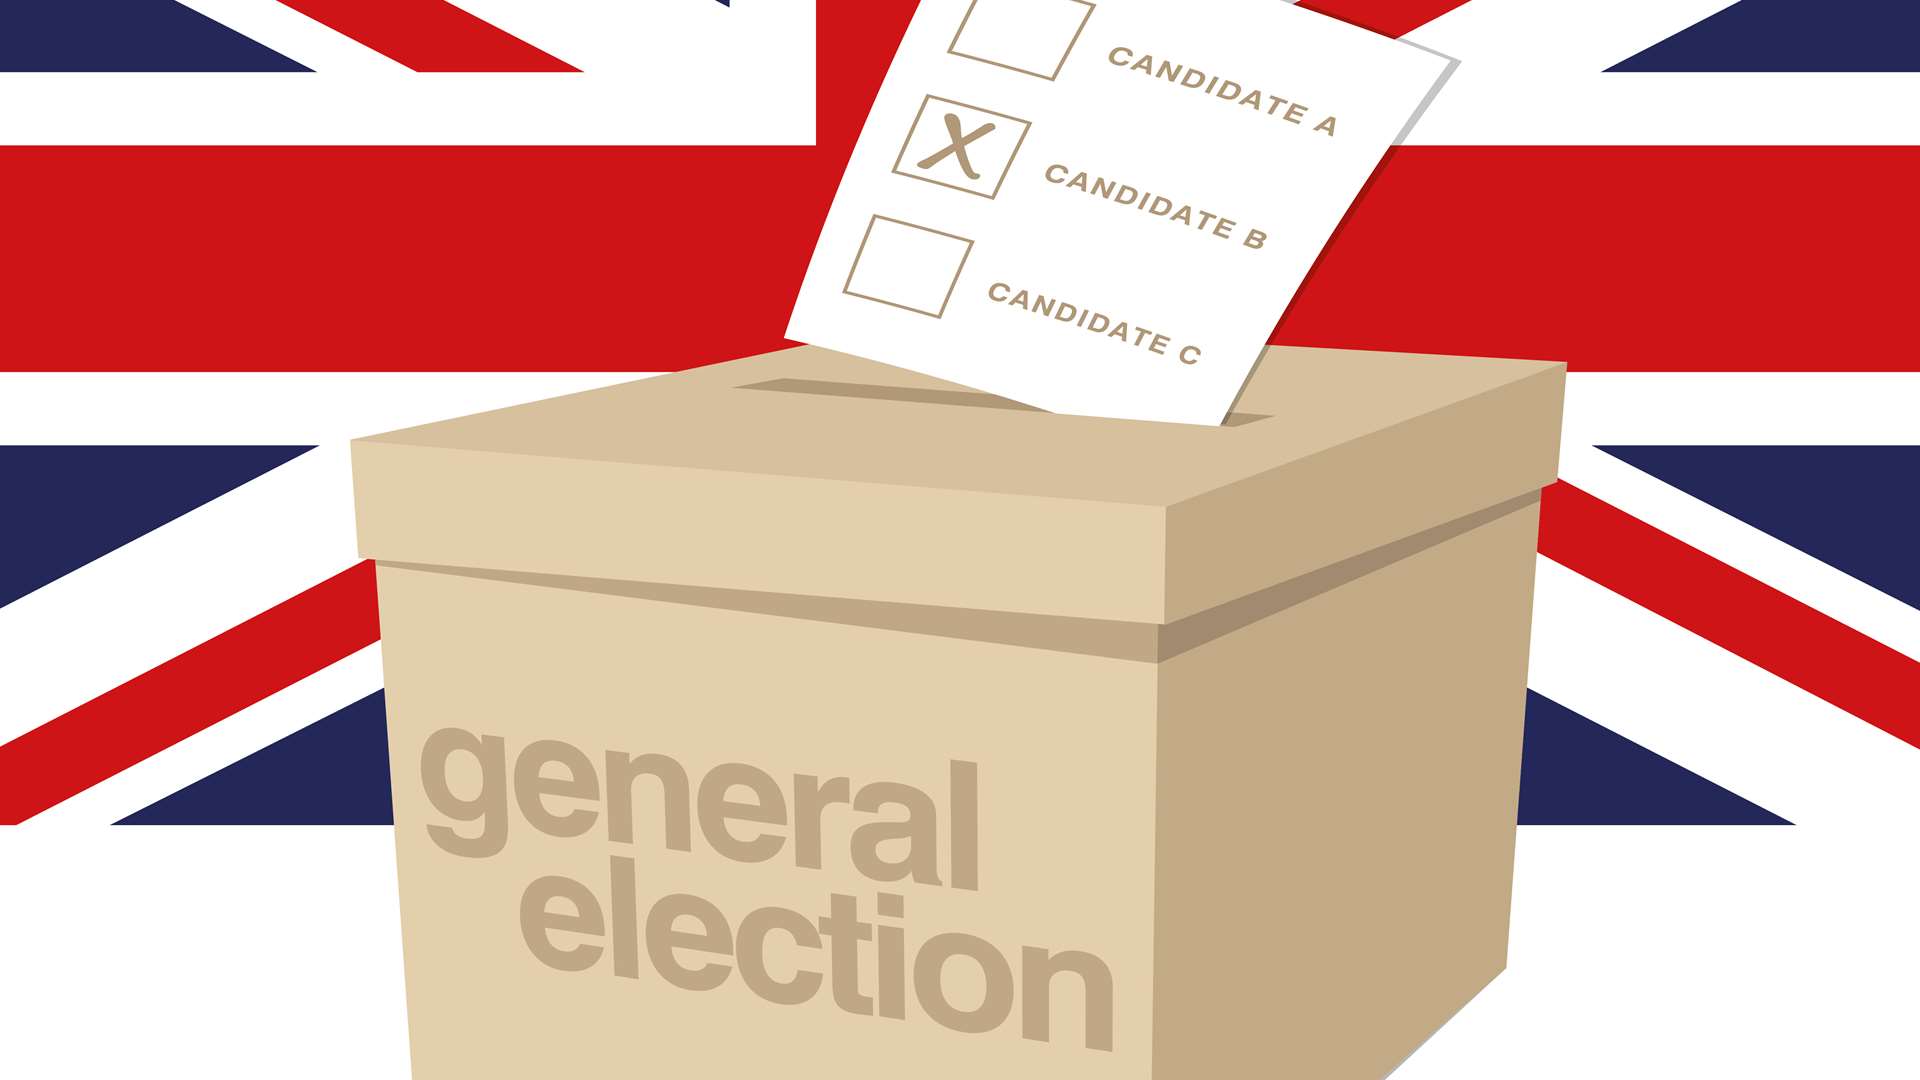 We want to involve you in our general election coverage